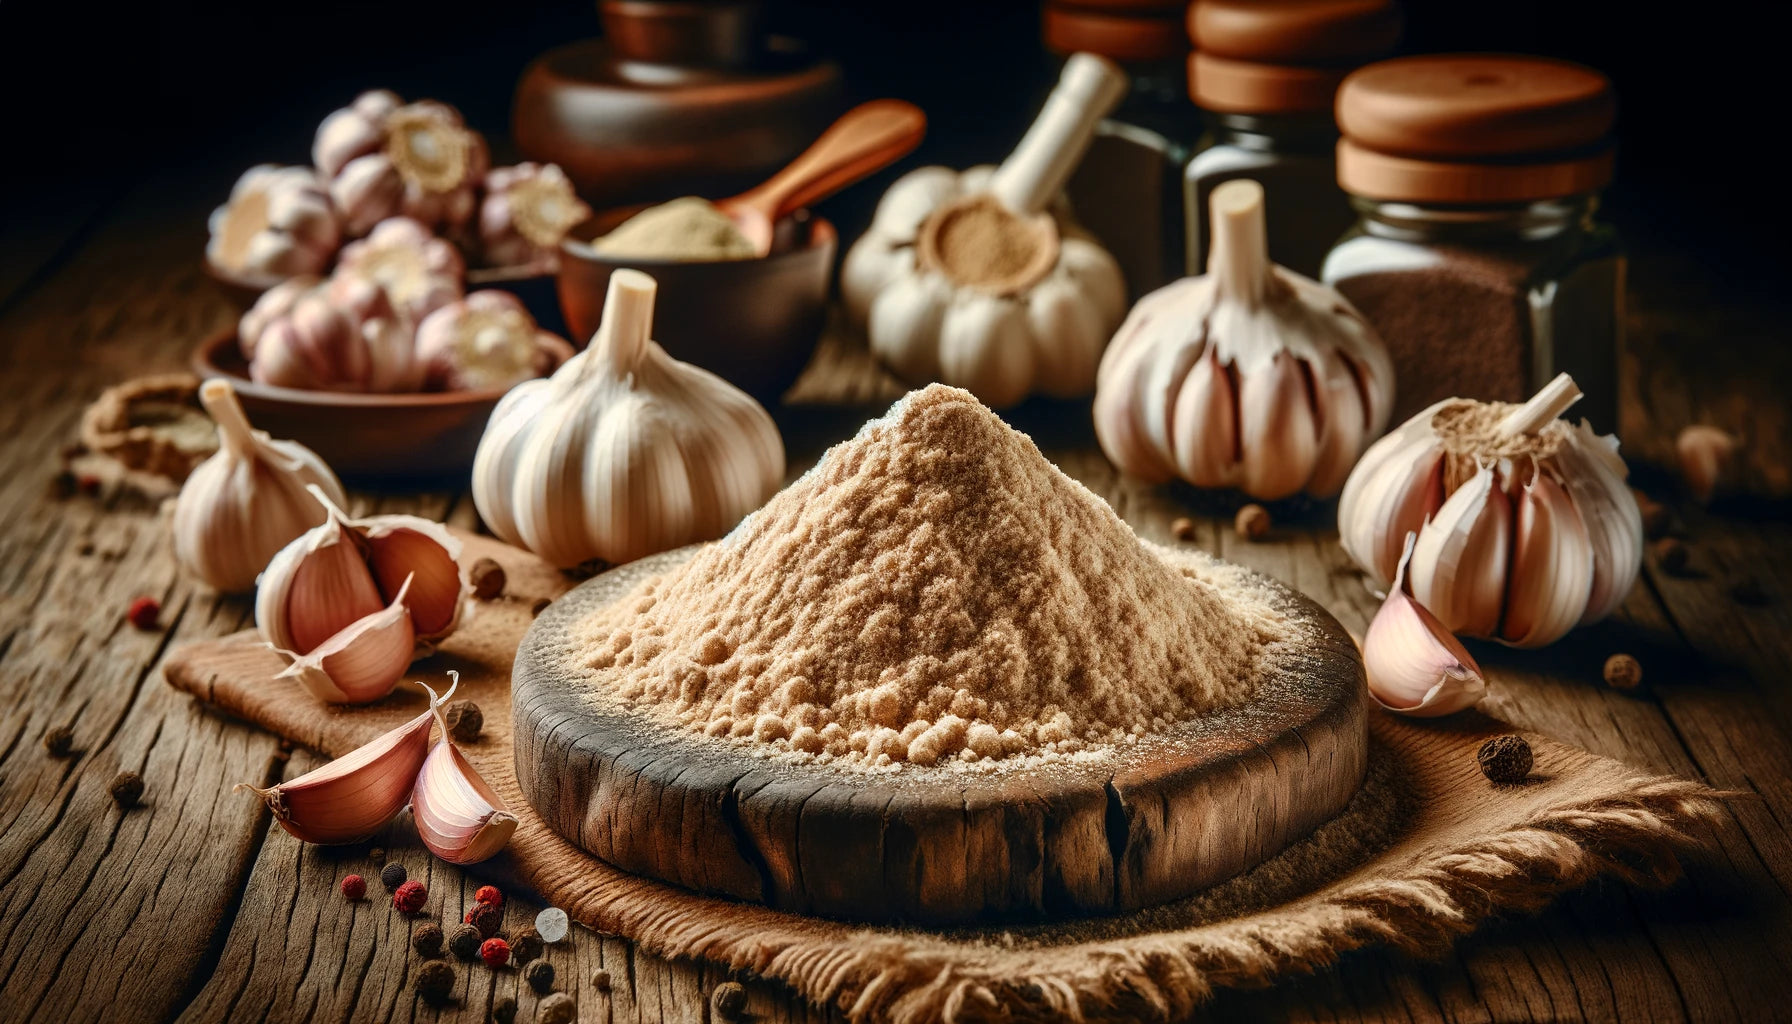 This image presents Garlic Powder in a visually appealing and artistic manner, set in a rustic kitchen setting. It emphasizes the culinary and medicinal value of garlic powder